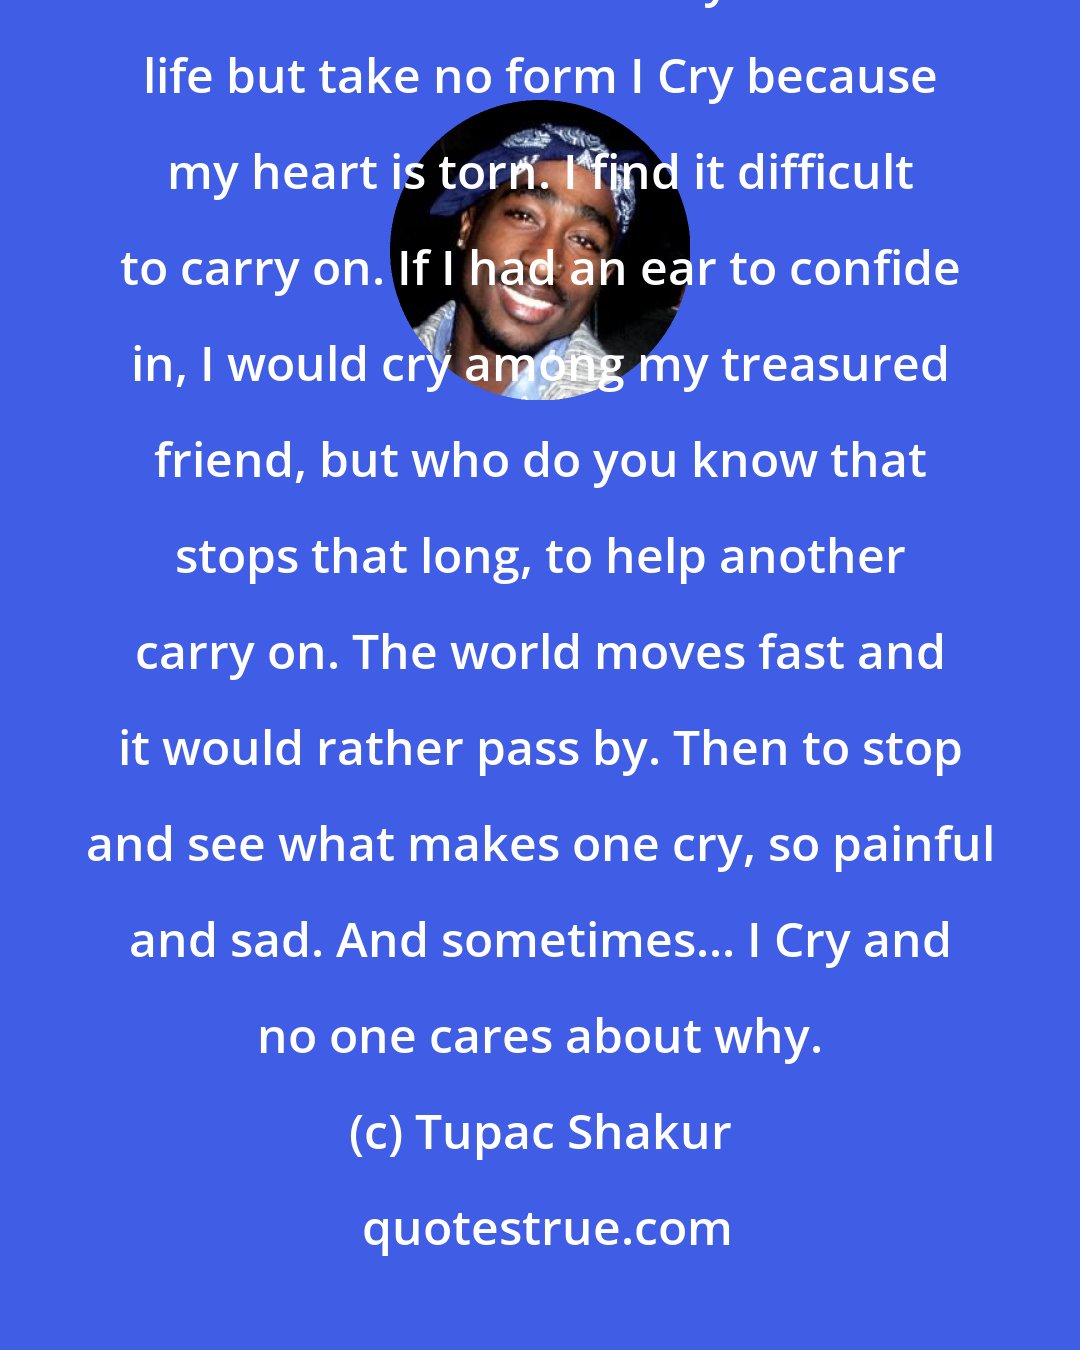 Tupac Shakur: Sometimes when I'm alone I Cry, Cause I am on my own. The tears I cry are bitter and warm. They flow with life but take no form I Cry because my heart is torn. I find it difficult to carry on. If I had an ear to confide in, I would cry among my treasured friend, but who do you know that stops that long, to help another carry on. The world moves fast and it would rather pass by. Then to stop and see what makes one cry, so painful and sad. And sometimes... I Cry and no one cares about why.